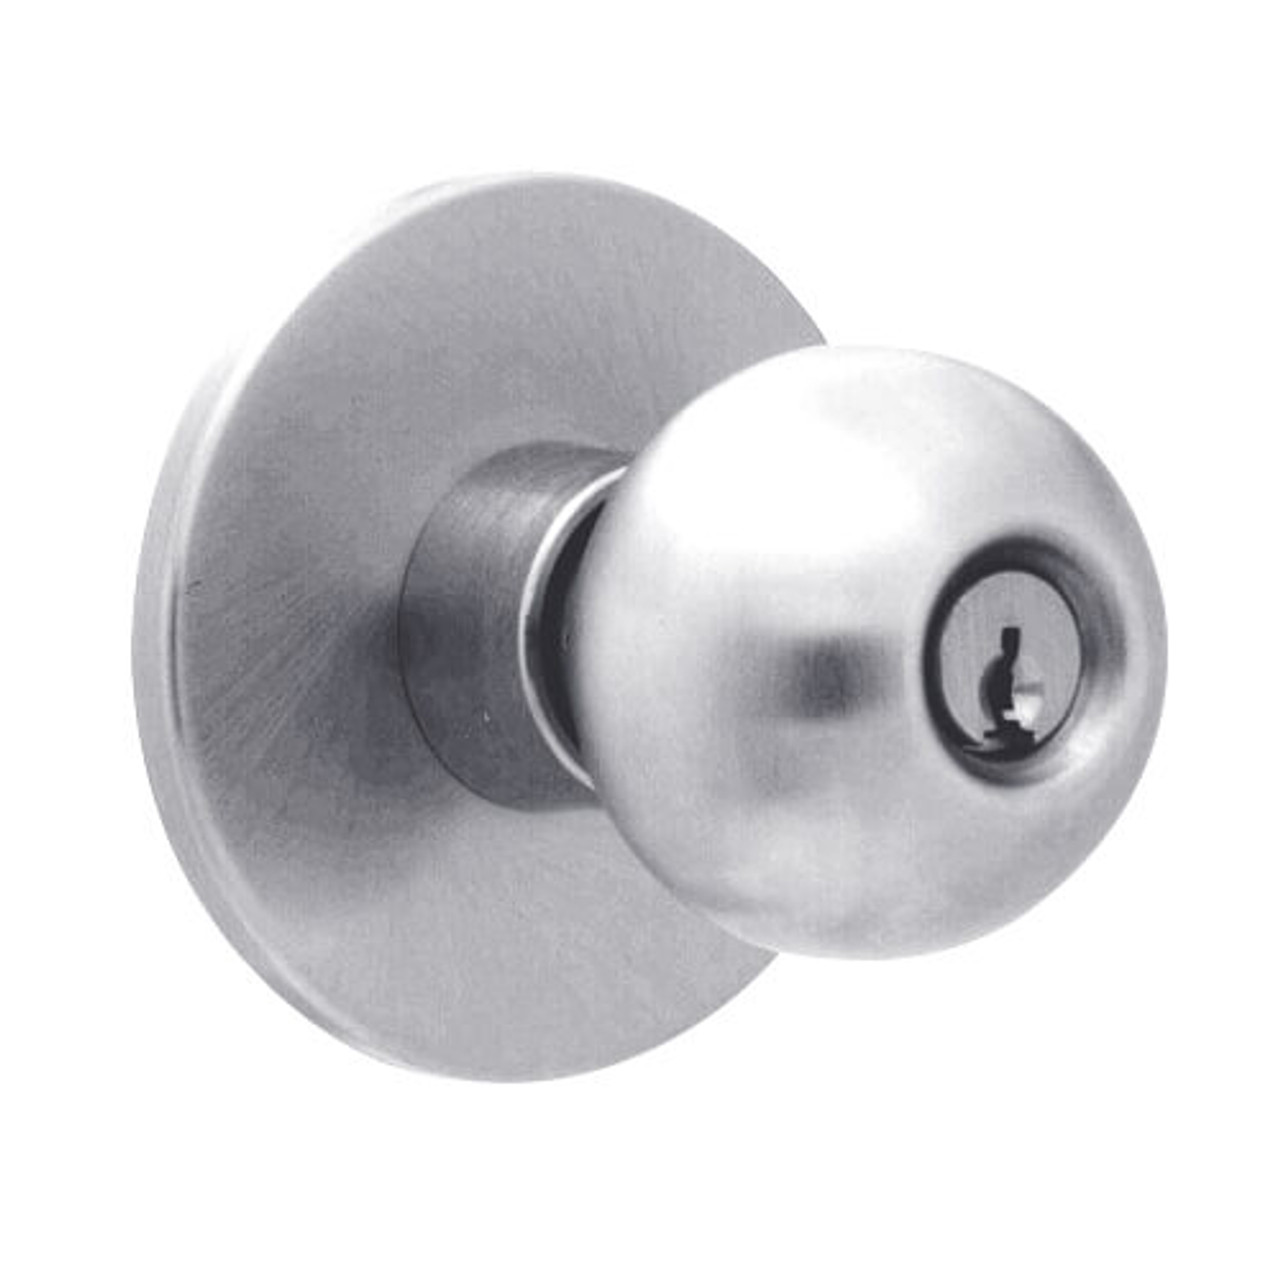 X521PD-HY-625 Falcon X Series Cylindrical Office Lock with Hana-York Knob Style in Bright Chrome Finish